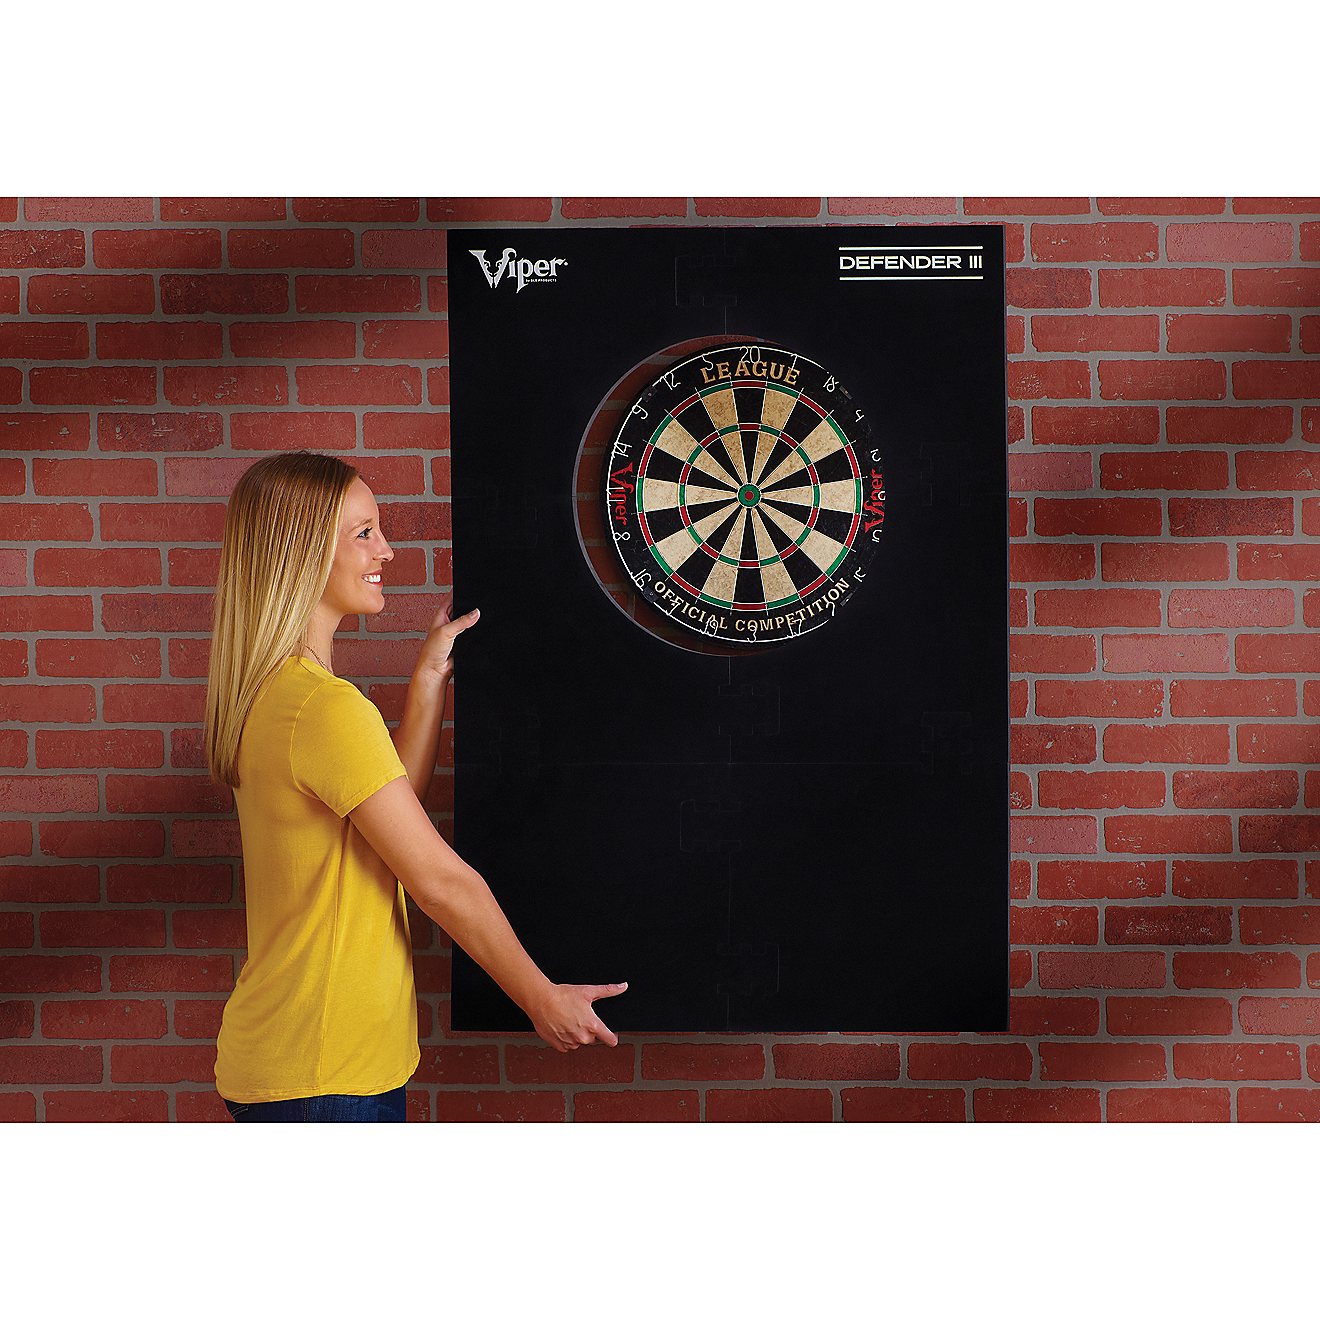 Viper Wall Defender III Dartboard Surround                                                                                       - view number 3